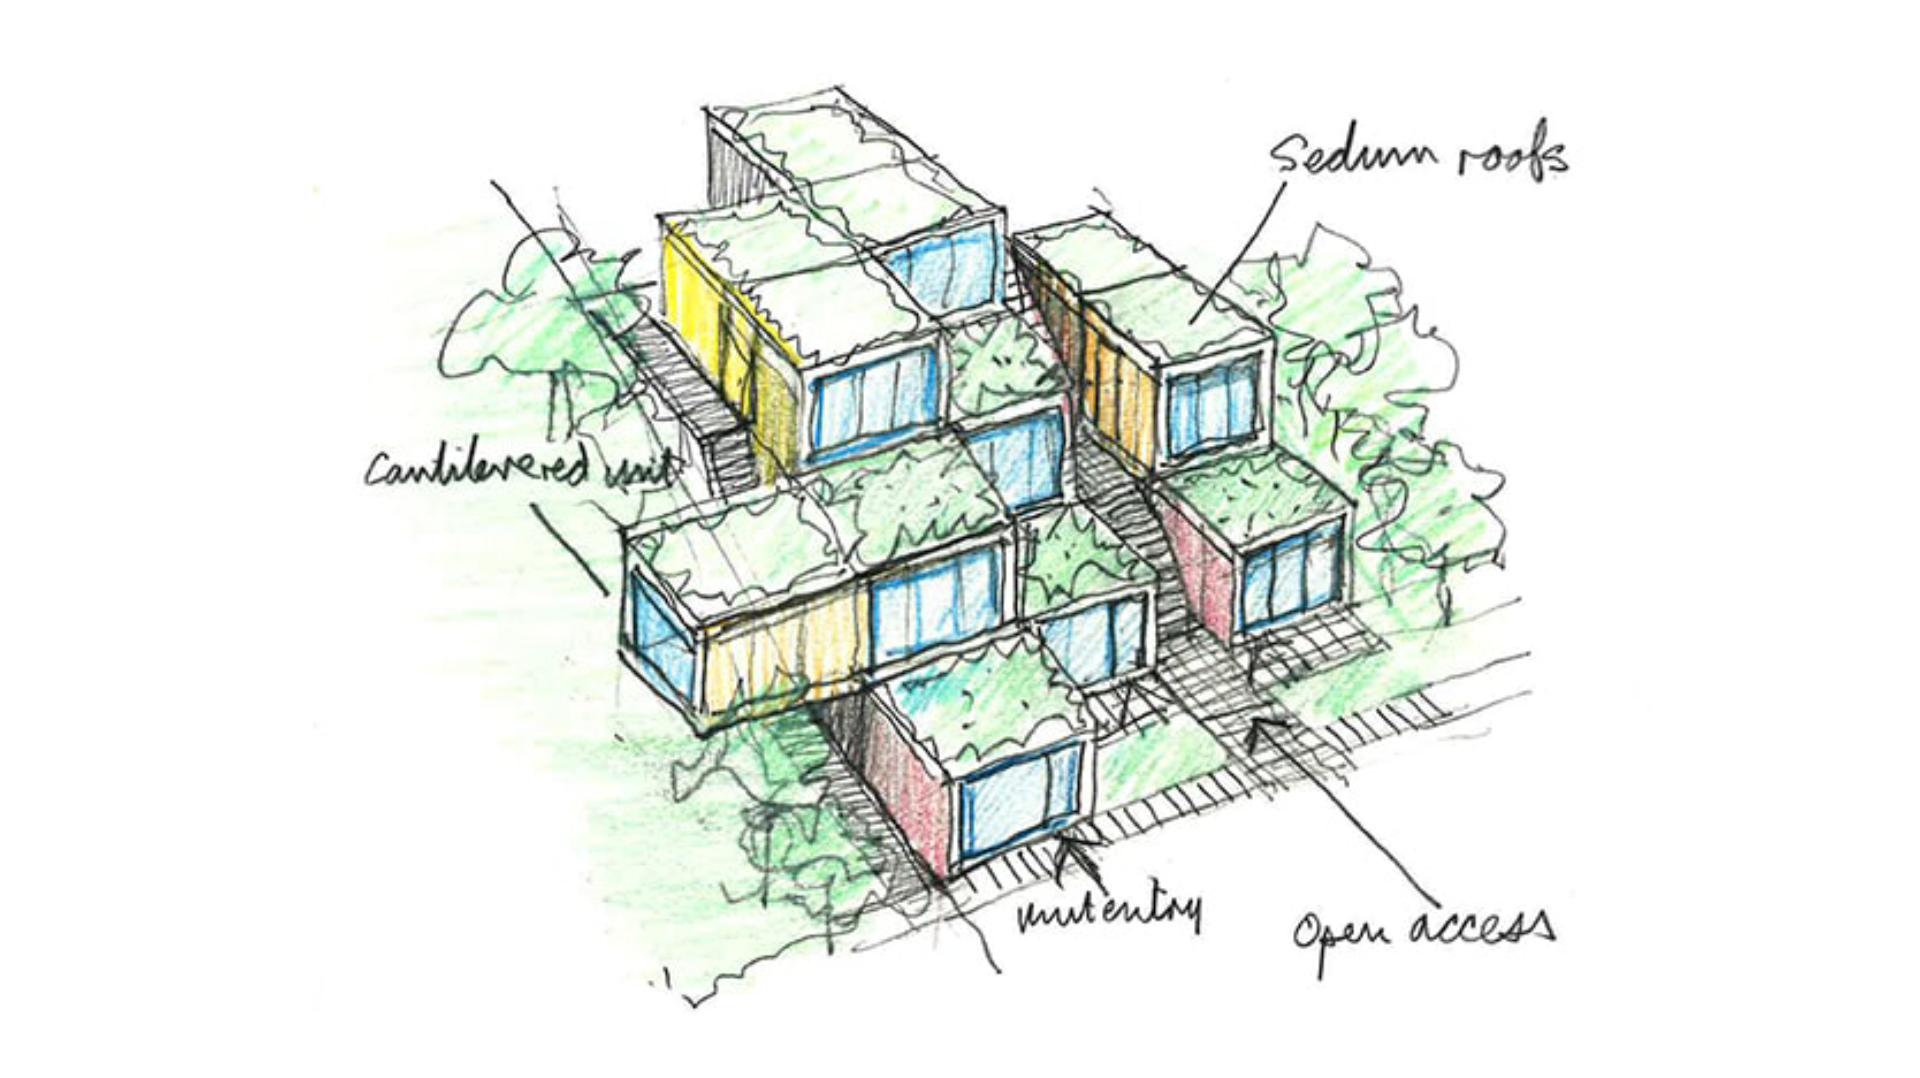 Architect designs of the accommodation 'pods'